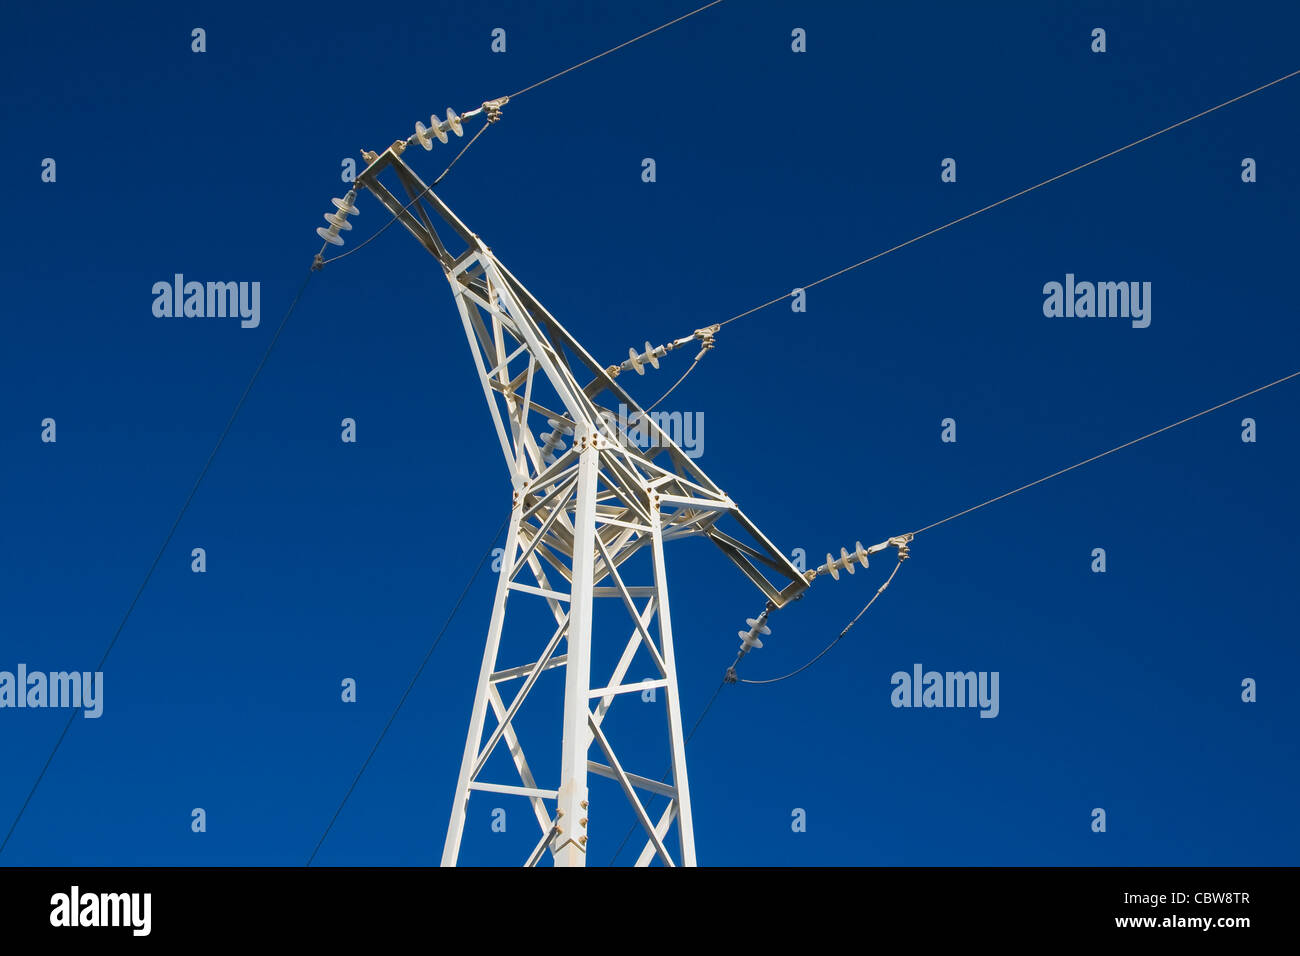 Metallic structure of transmission of electric current Stock Photo